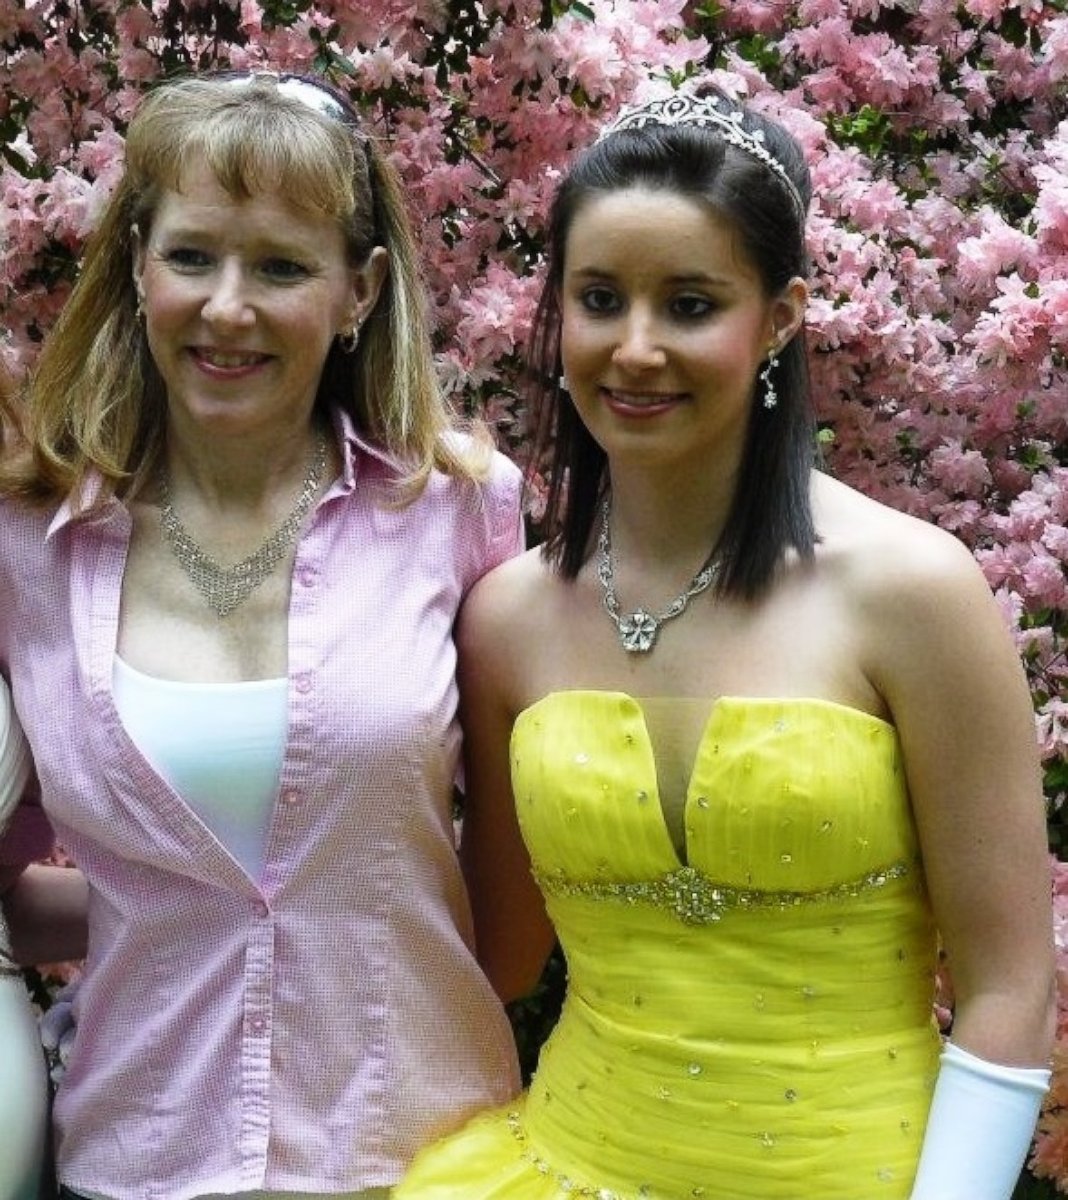 Nique Leili (left) is shown here with her daughter Alex Peters (right) before Alex went to her high school prom.